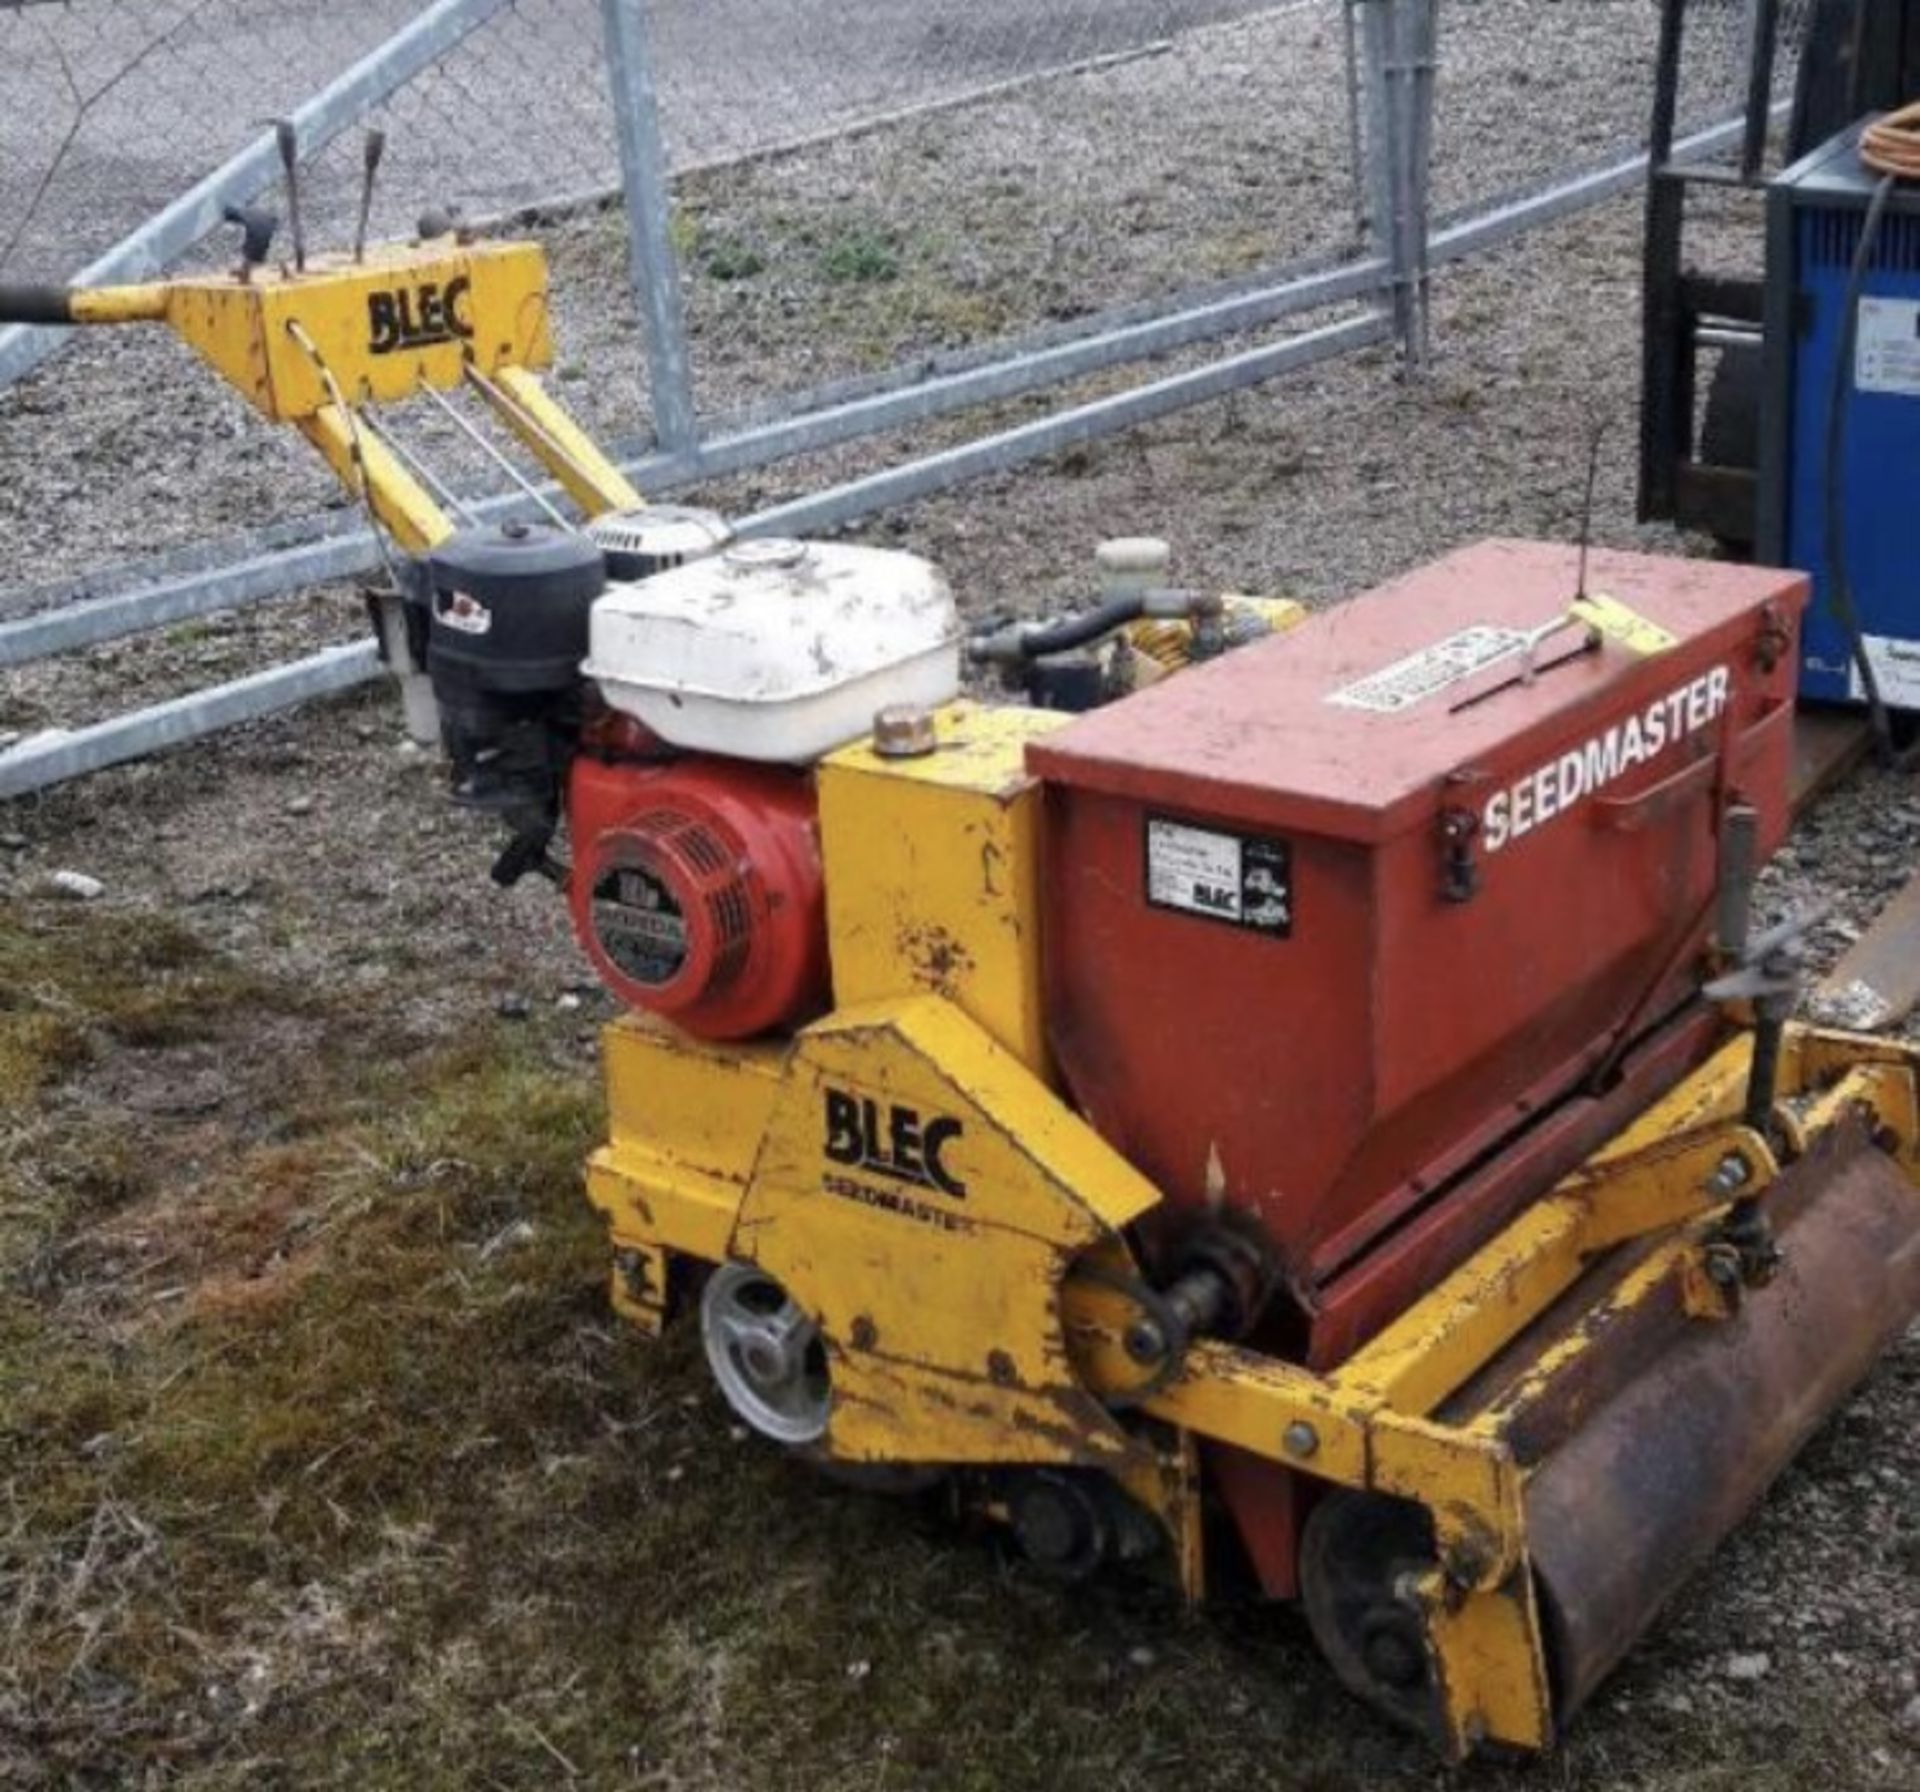 BLEC SEEDER HONDA PETROL  ENGINE WITH COMPACTION PLATE LOCATED IN NORTHERN IRELAND.